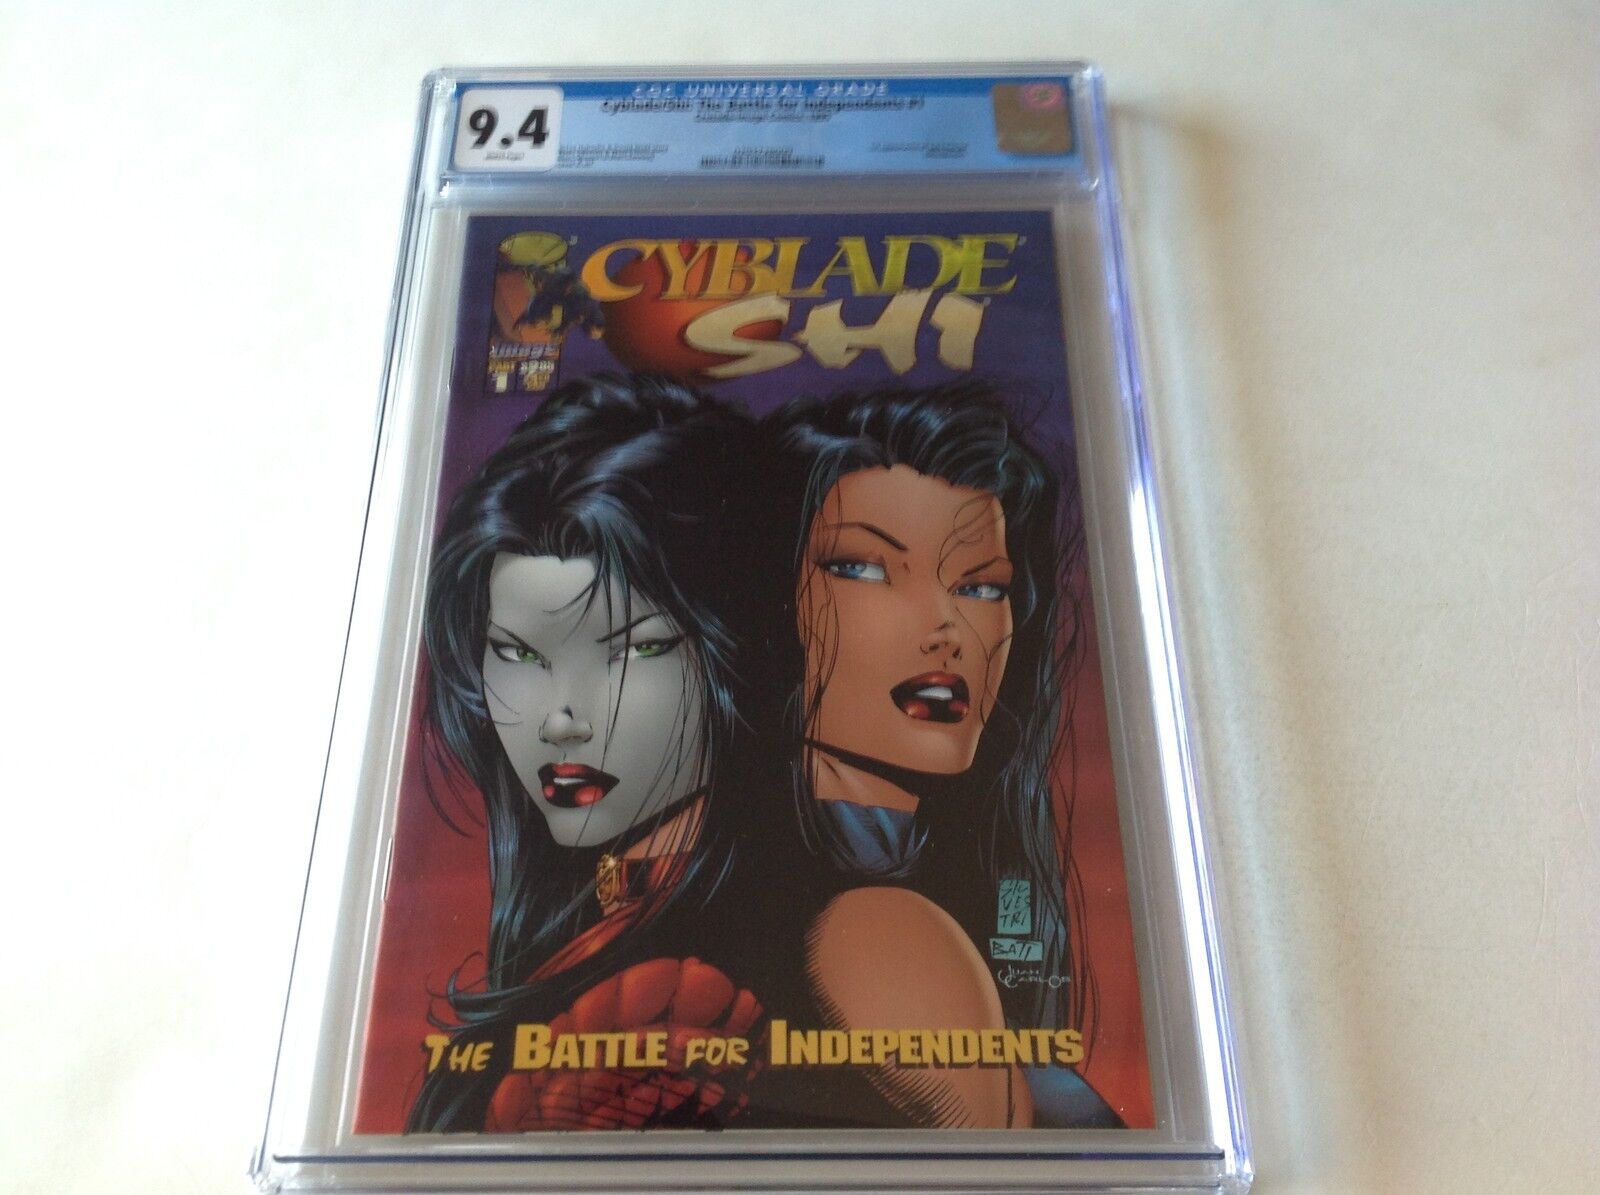 CYBLADE SHI BATTLE FOR INDEPENDENTS 1 CGC 9.4 1ST SARAH PEZZINI WITCHBLADE COMIC